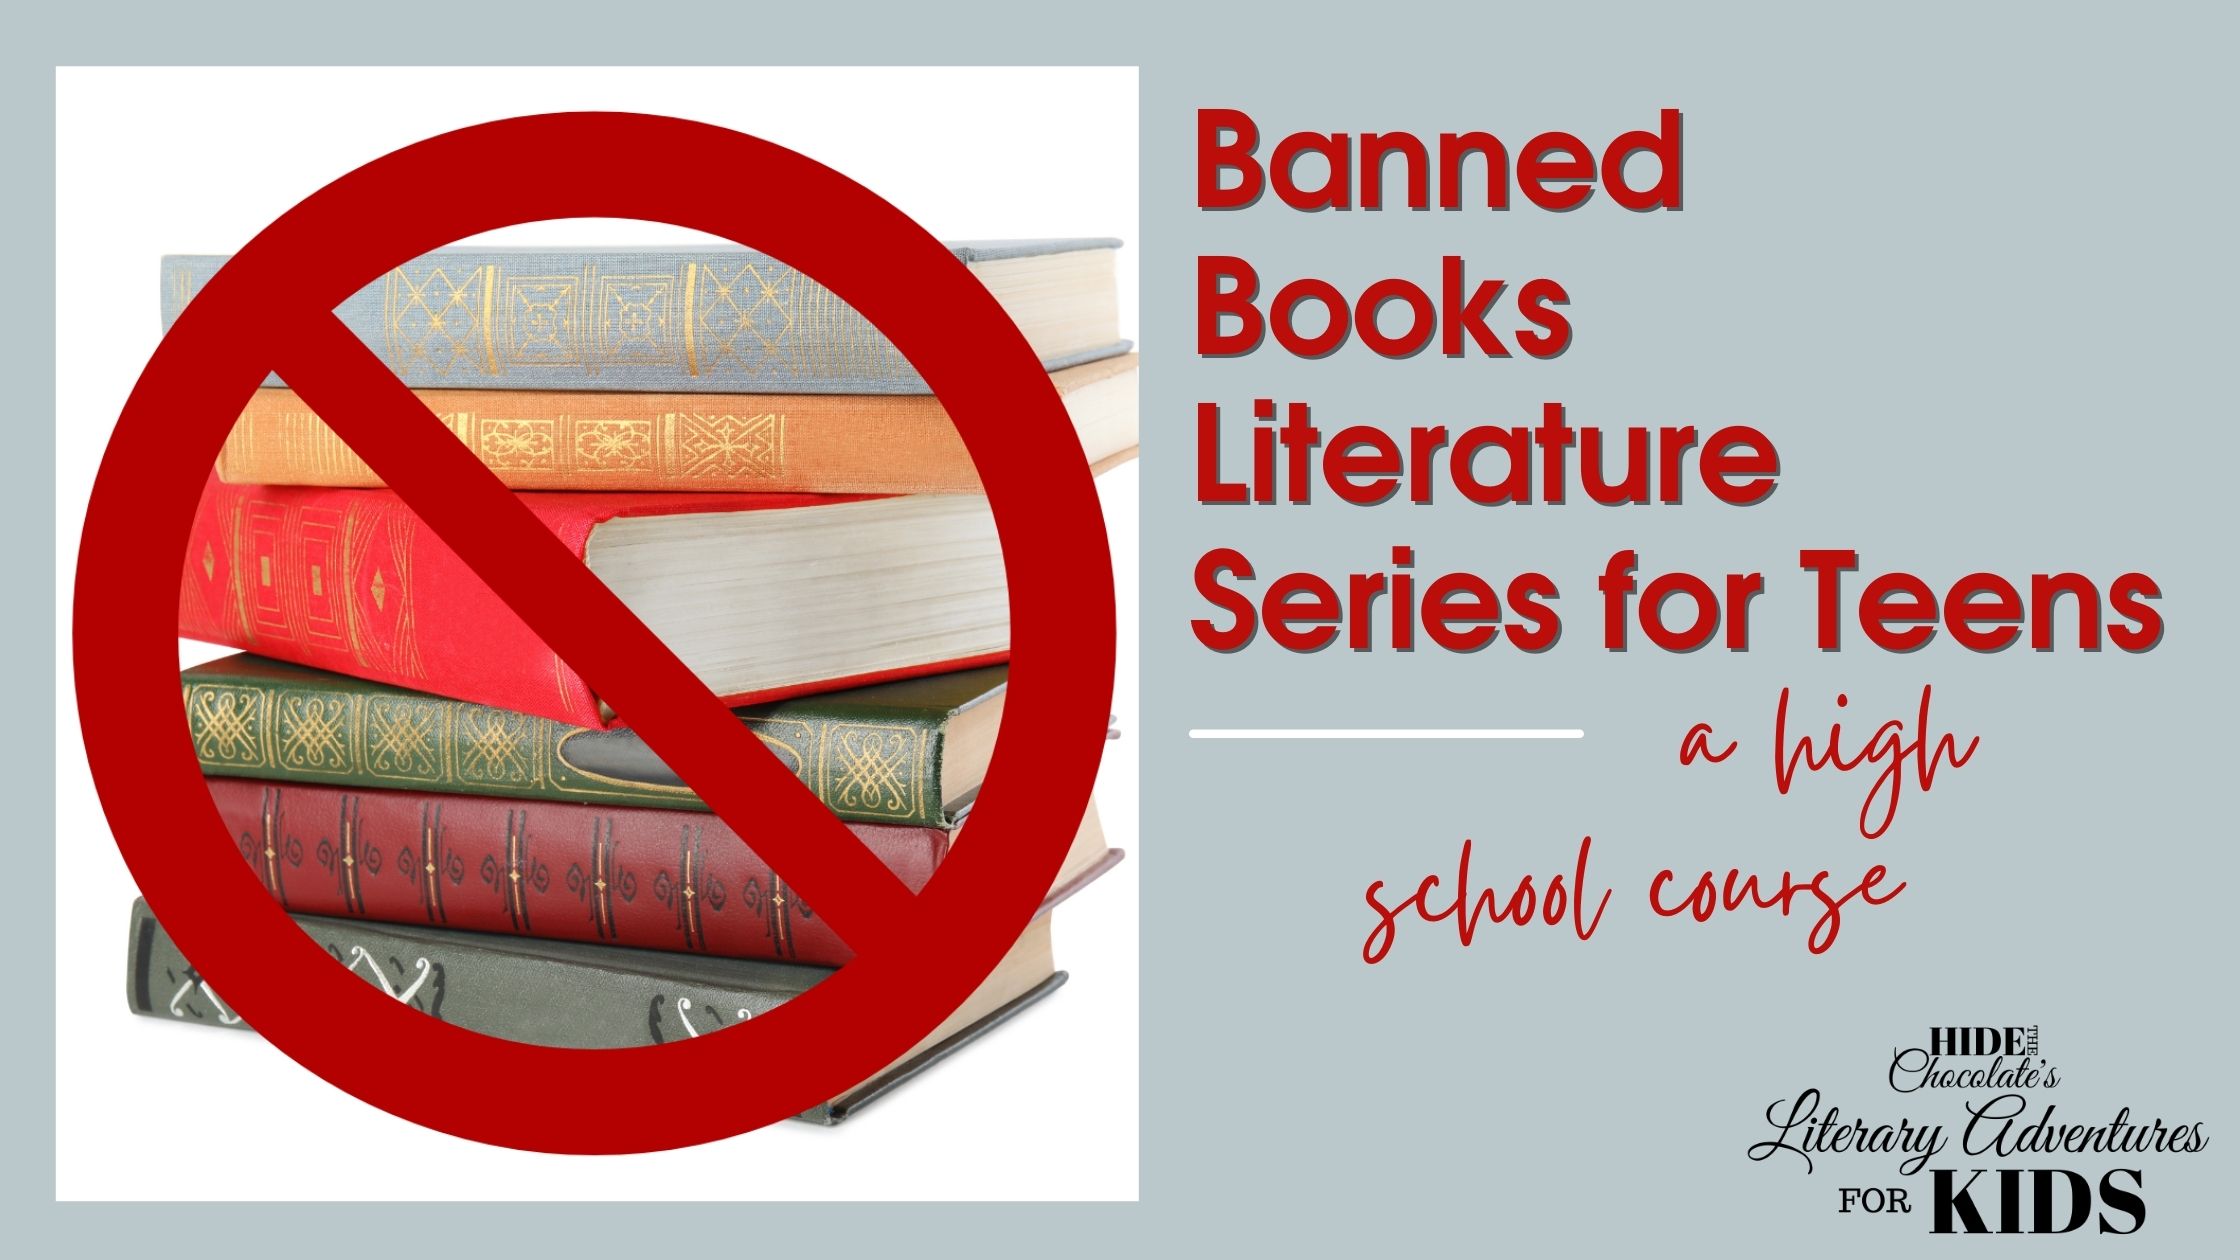 Banned Books Literature Series for Teens